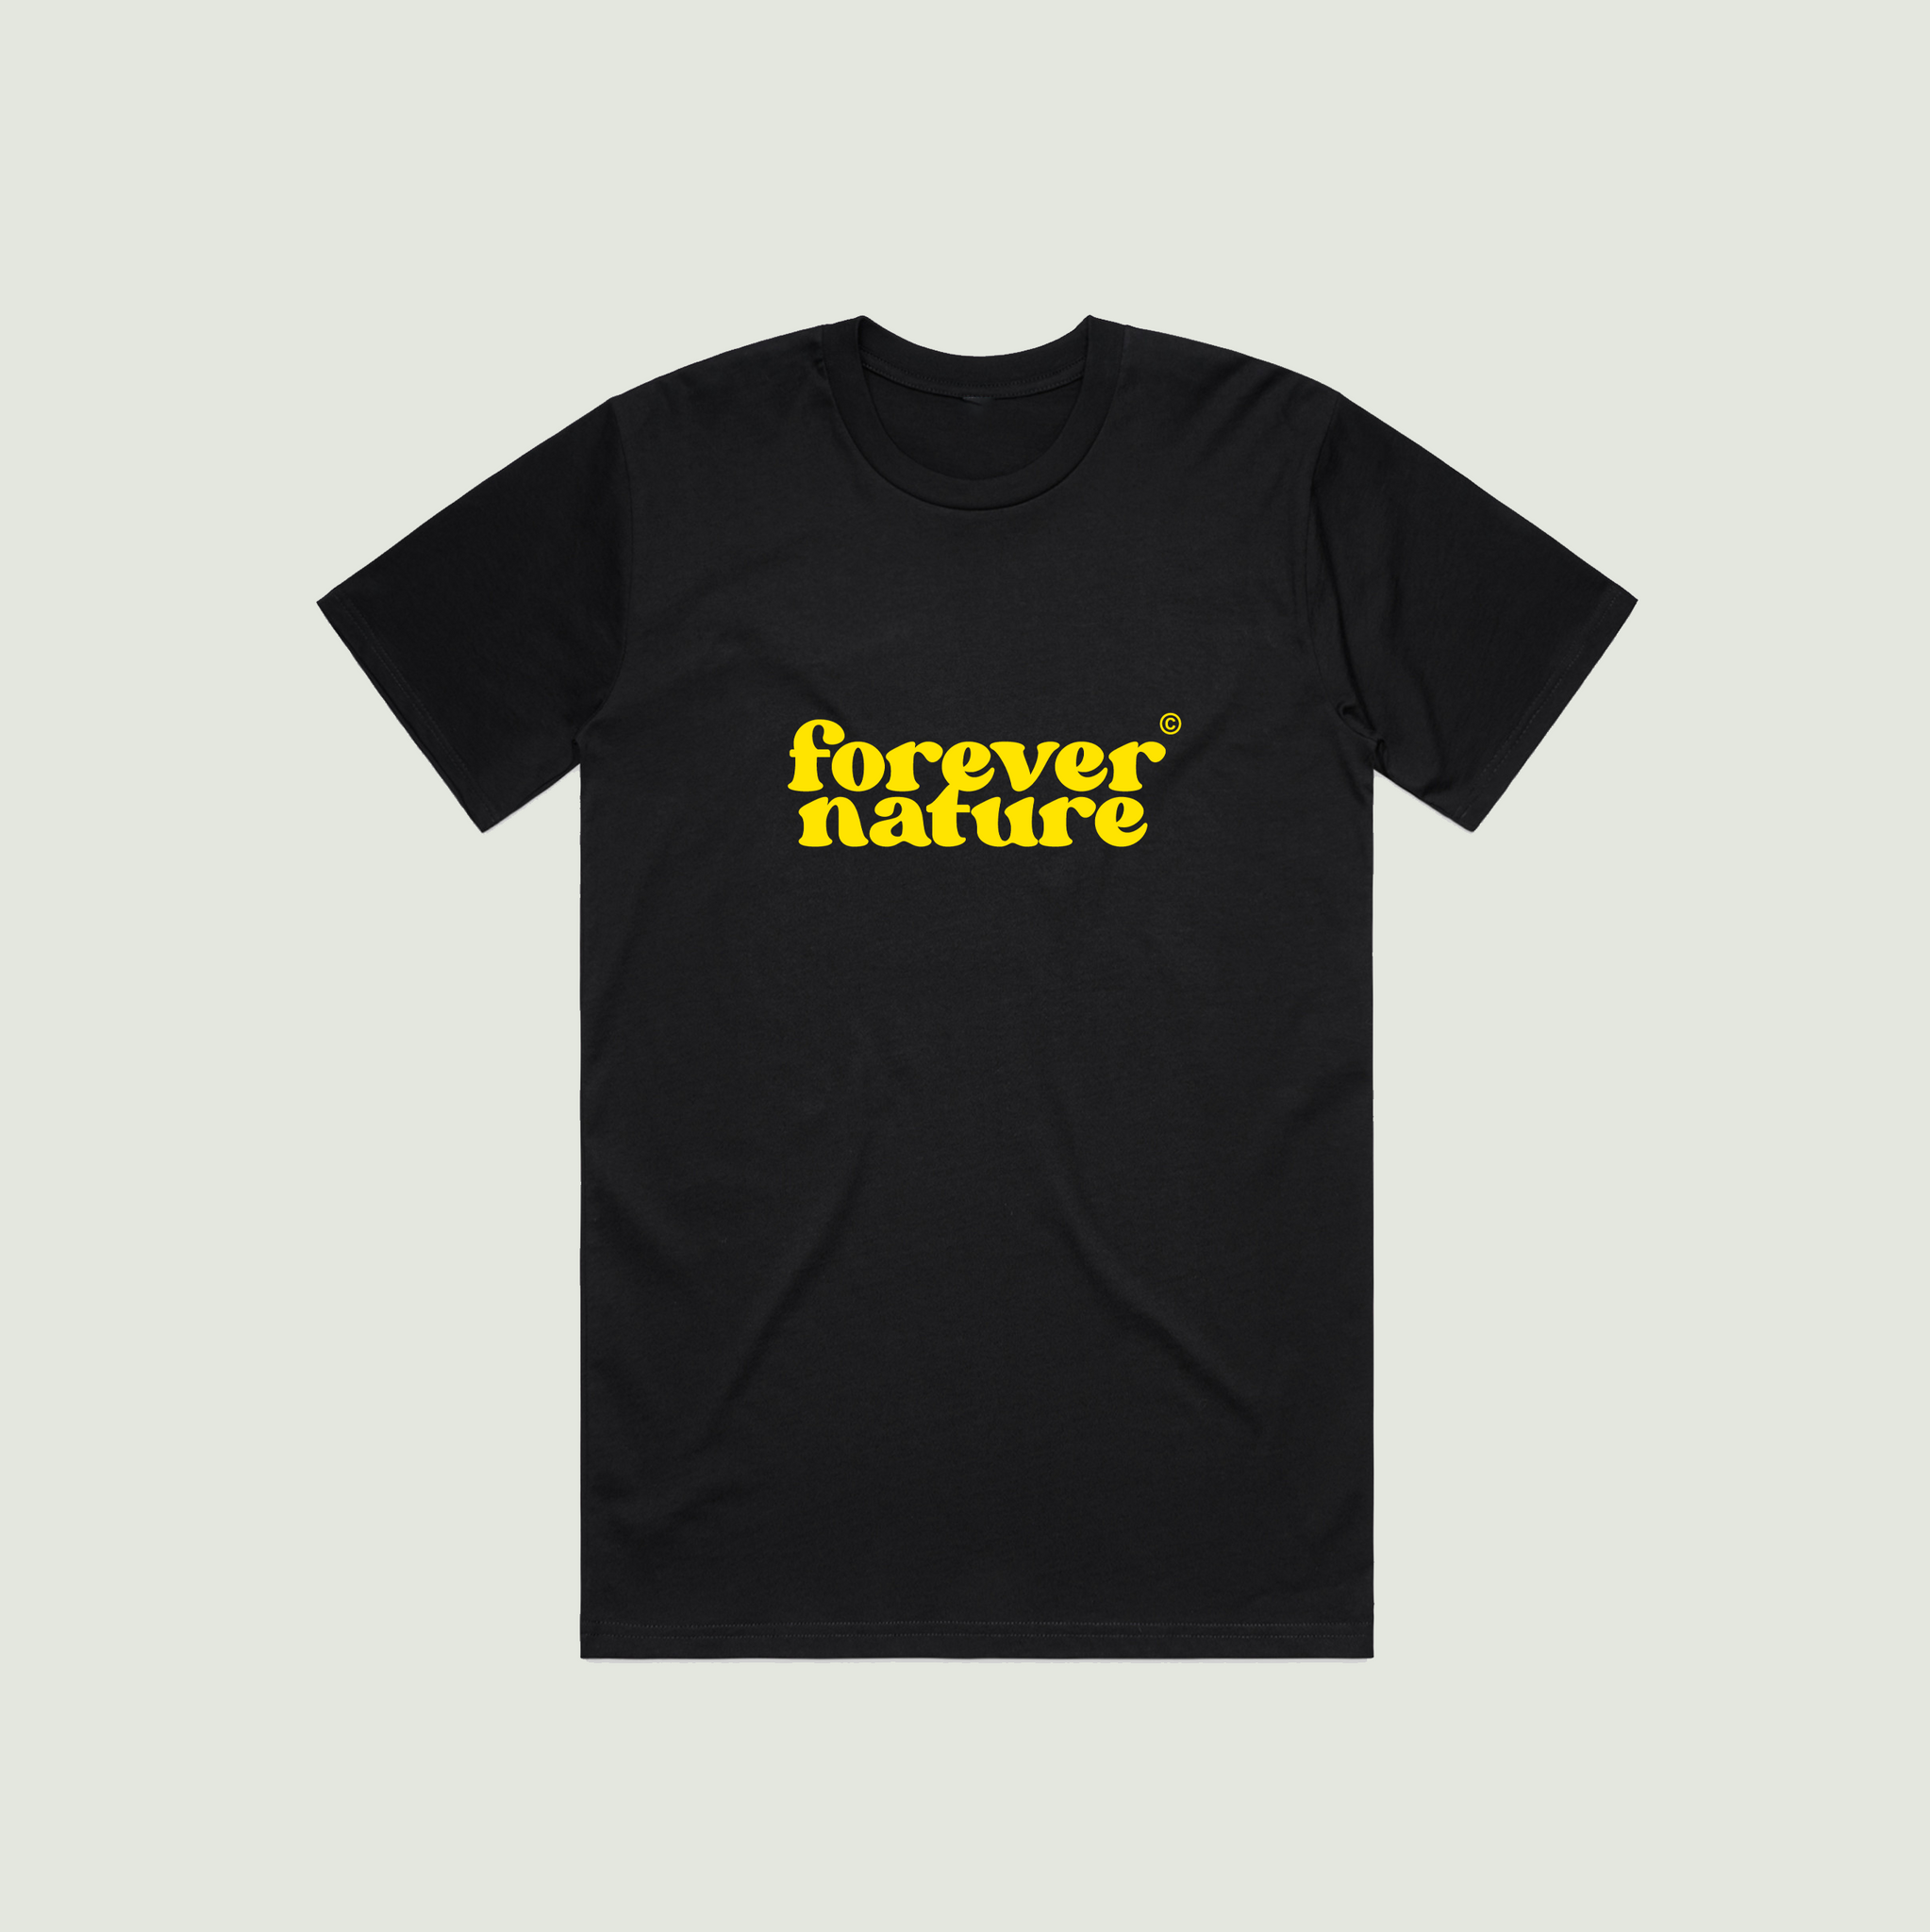 Forever Nature Tee in Black & Yellow